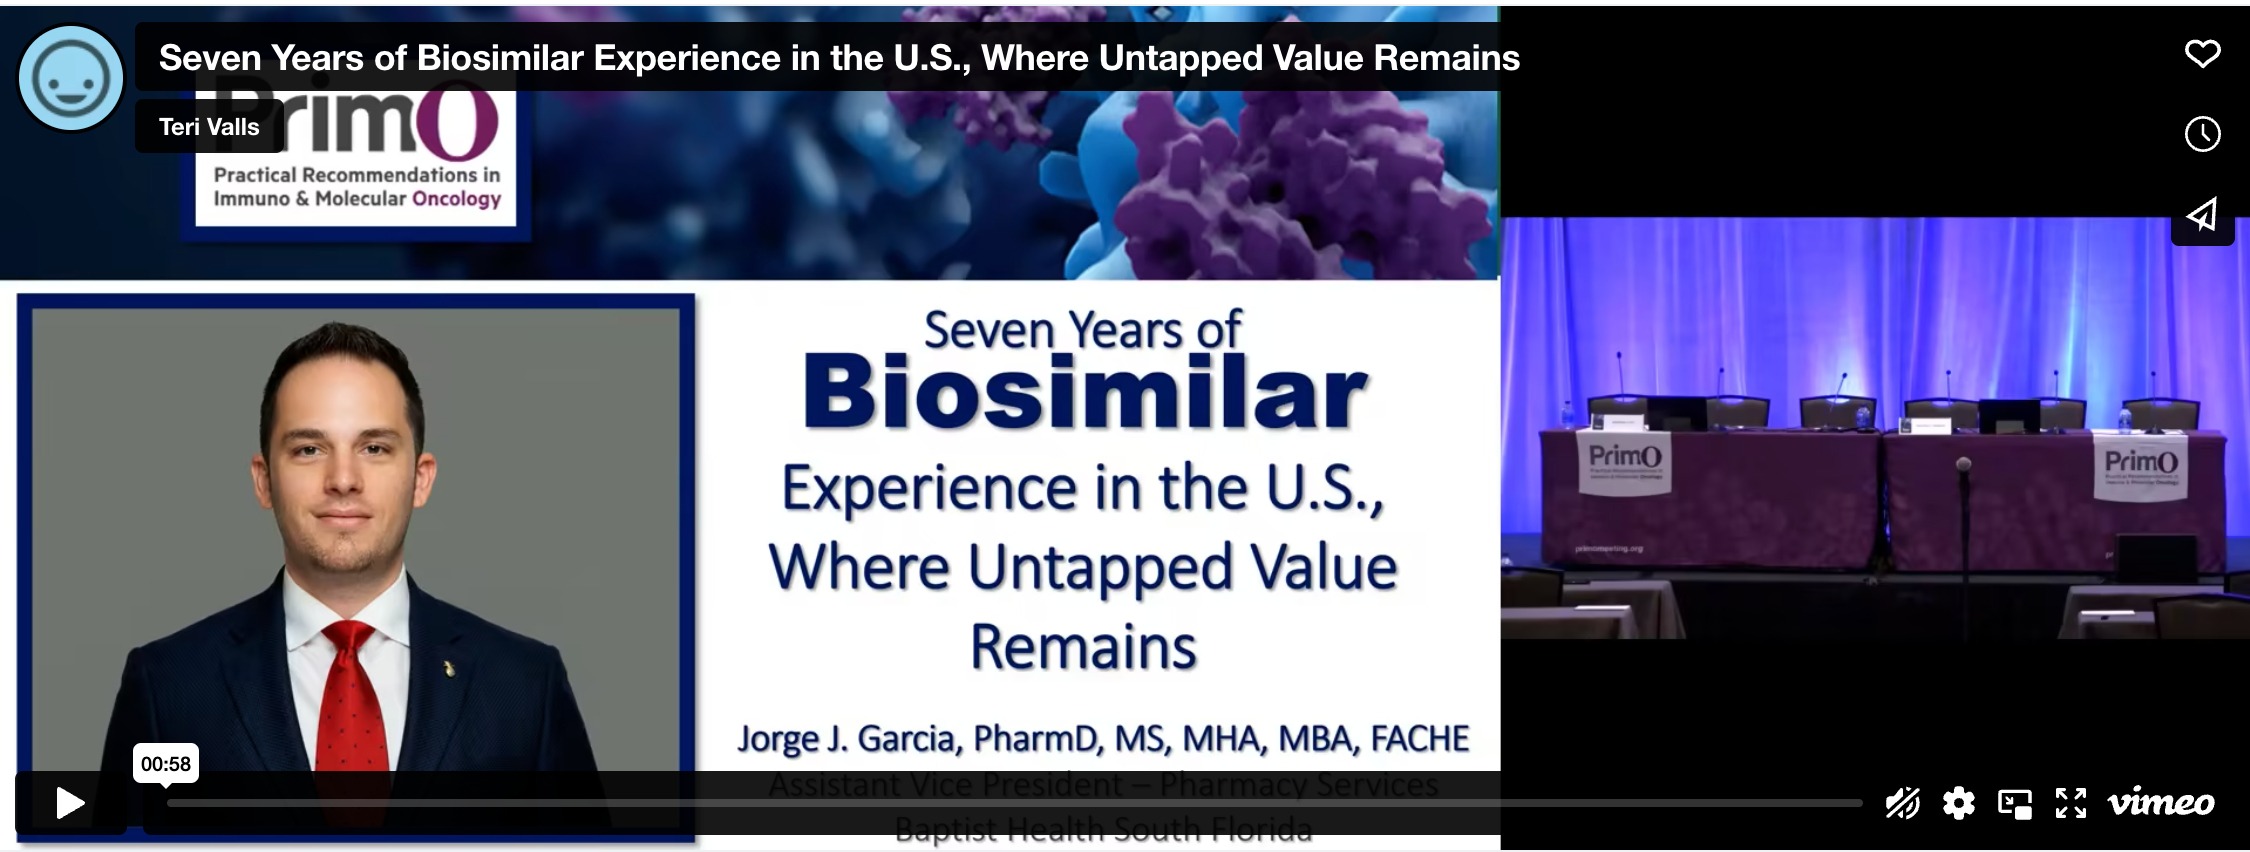 Seven Years of Biosimilar Experience in the U.S., Where Untapped Value Remains